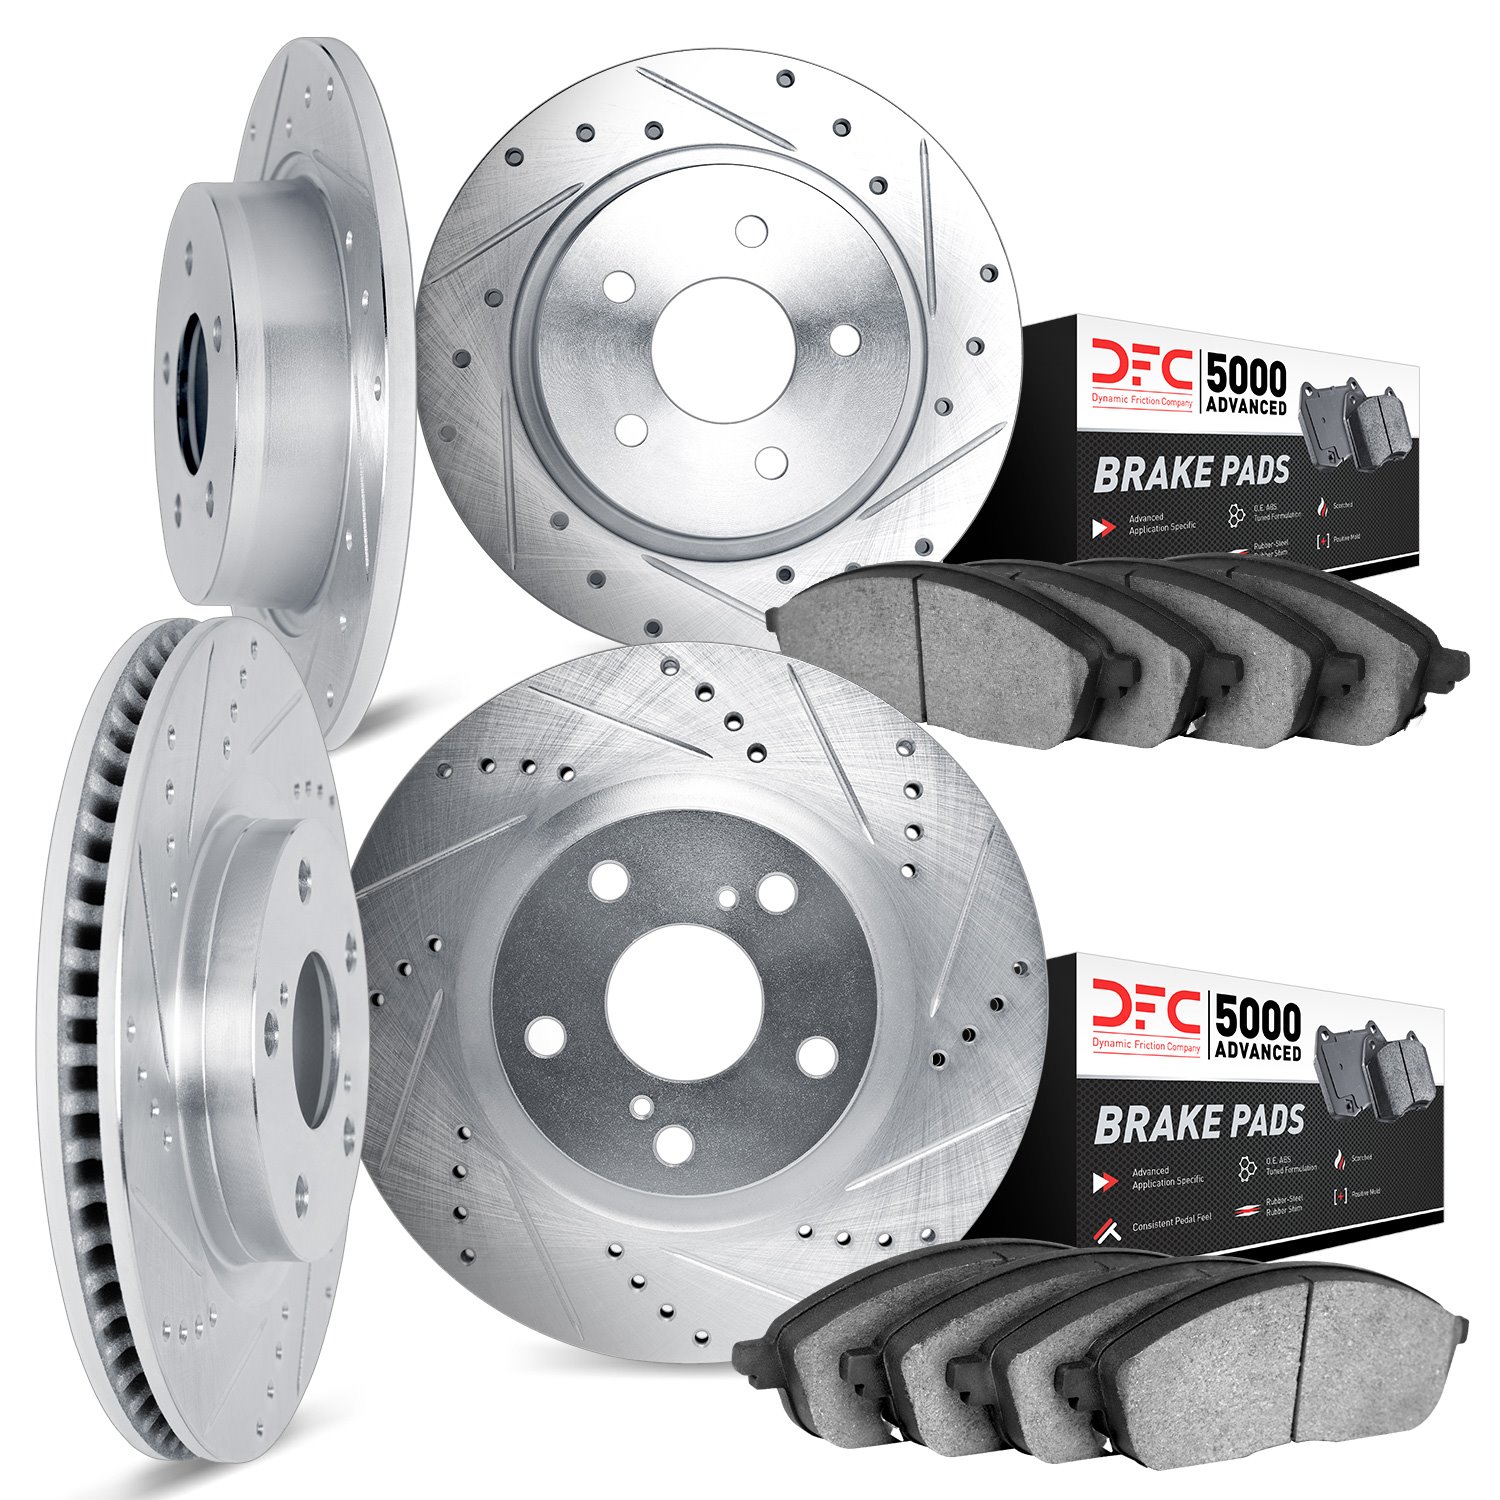 7504-31004 Drilled/Slotted Brake Rotors w/5000 Advanced Brake Pads Kit [Silver], 1993-1997 BMW, Position: Front and Rear